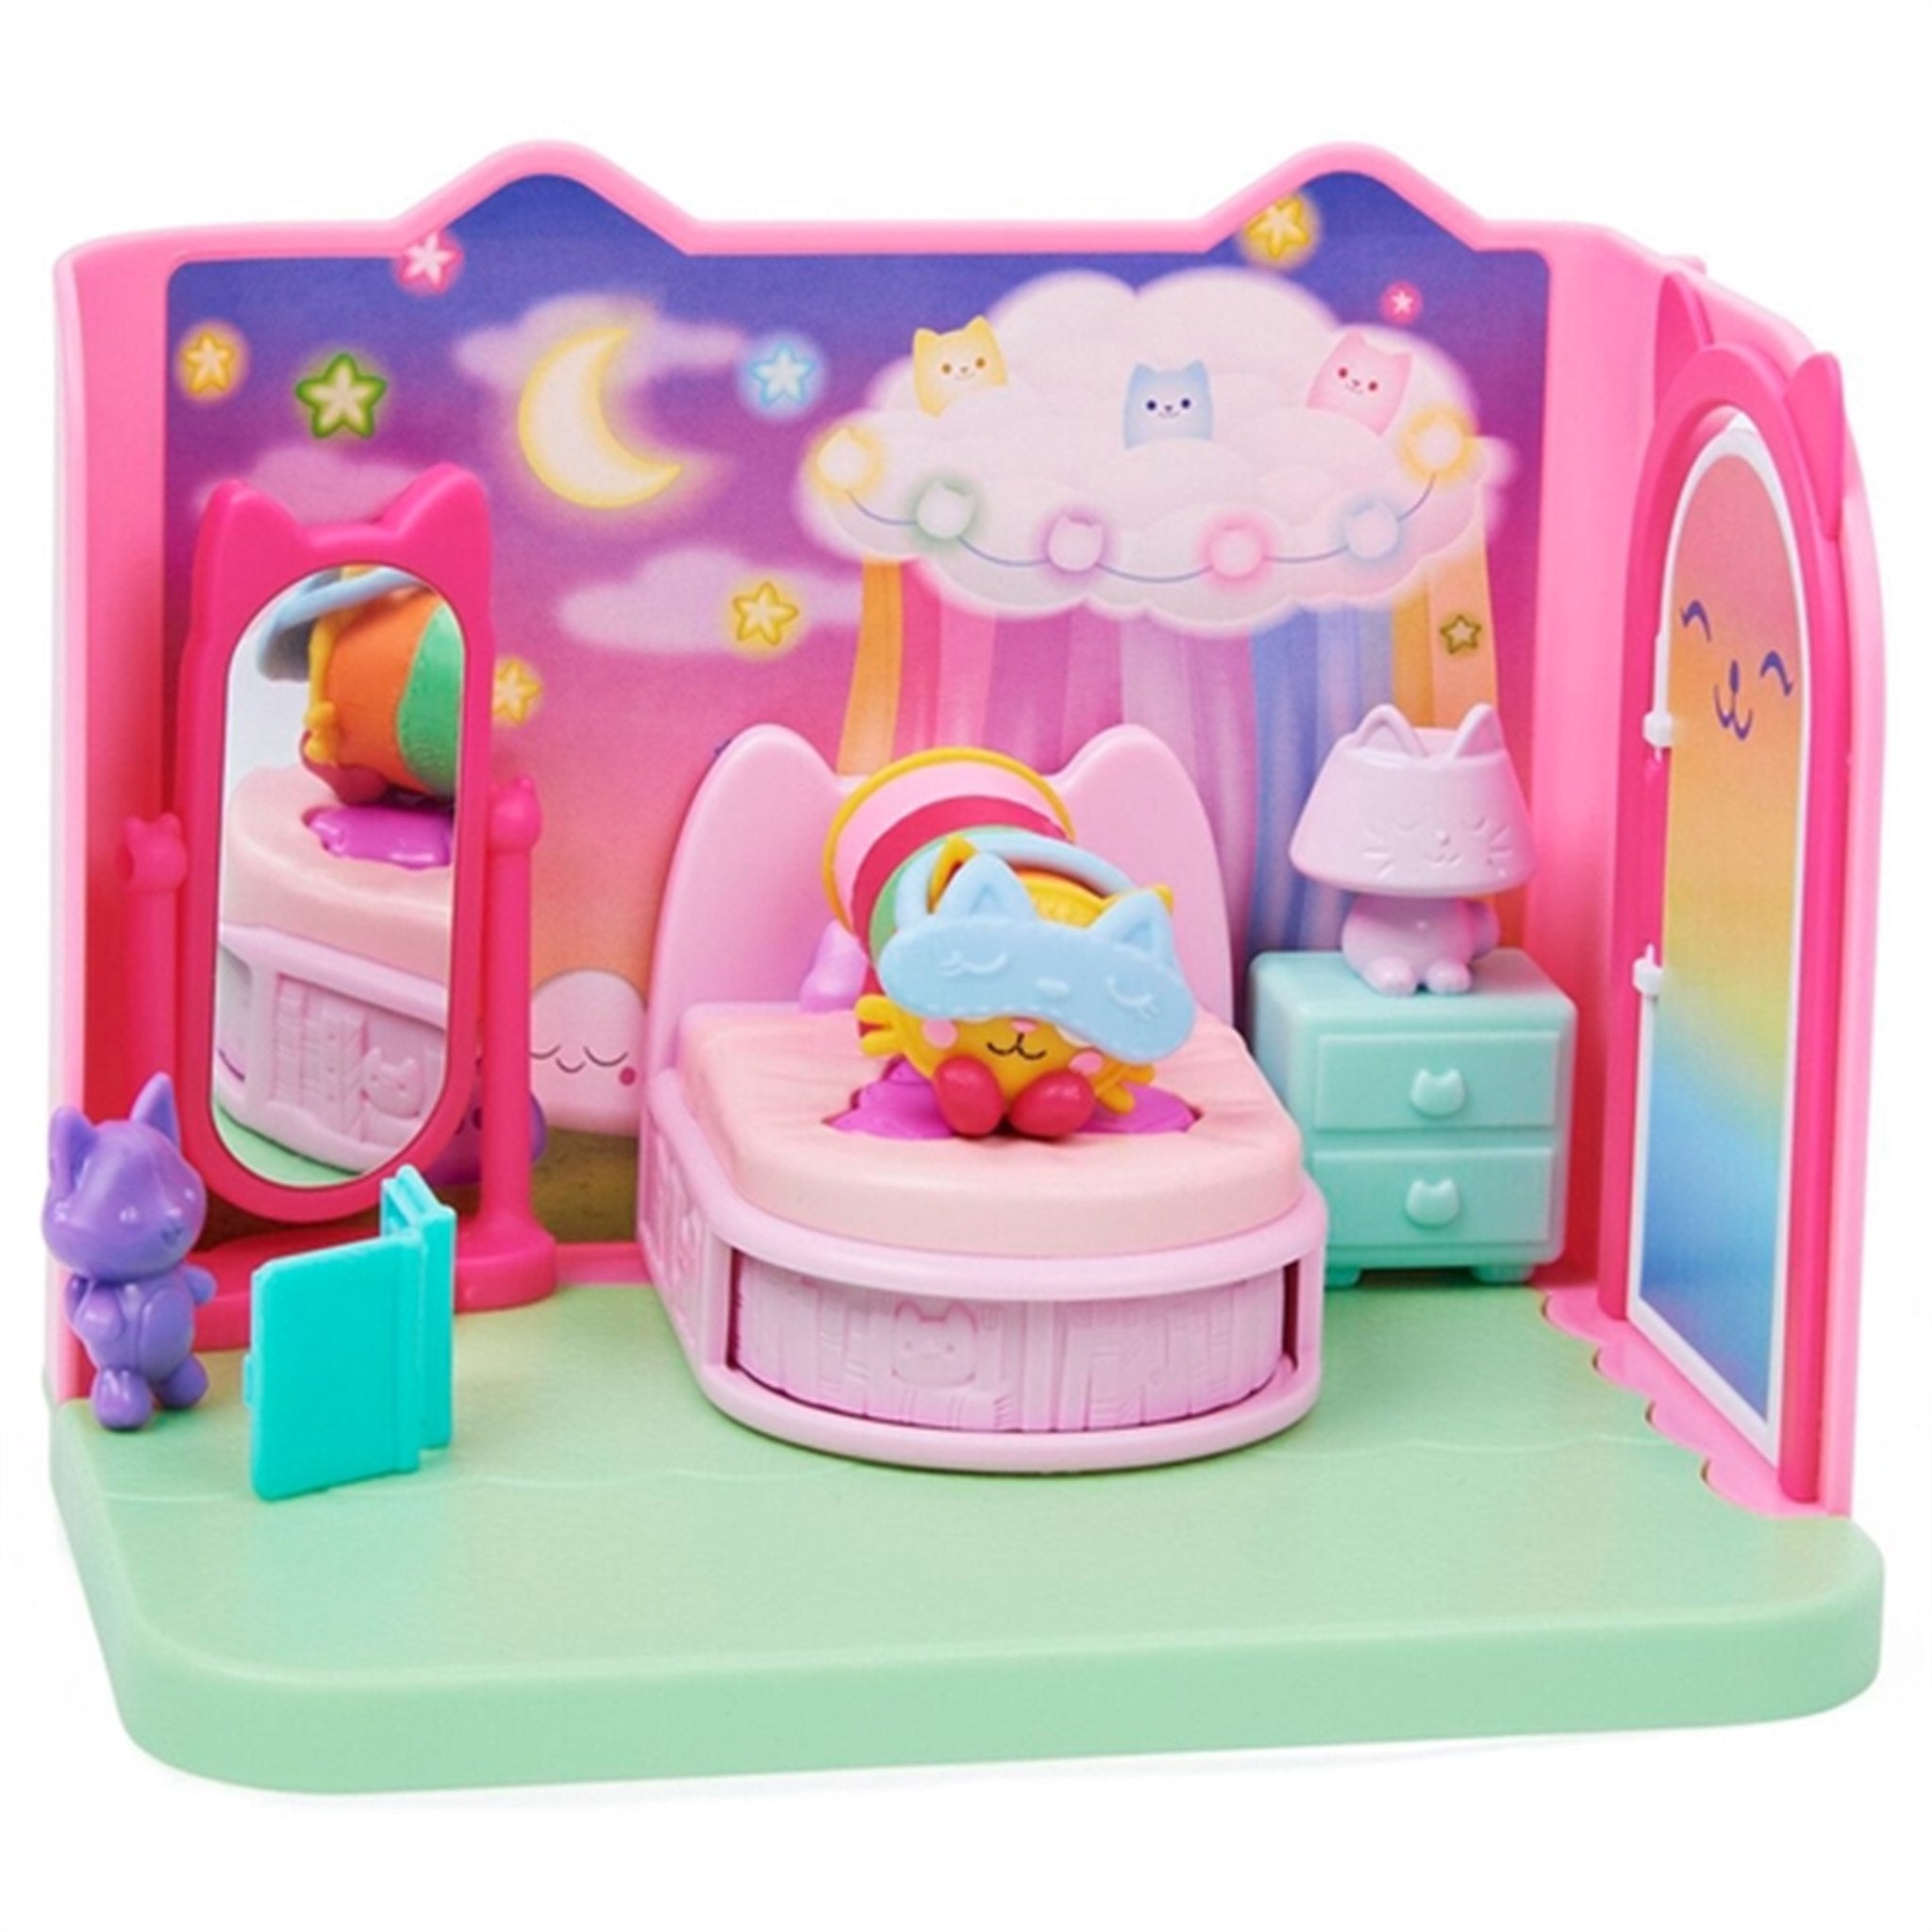 Gabby's Dollhouse - Deluxe Room - Pillow Cat's Sweet Dreams Bedroom